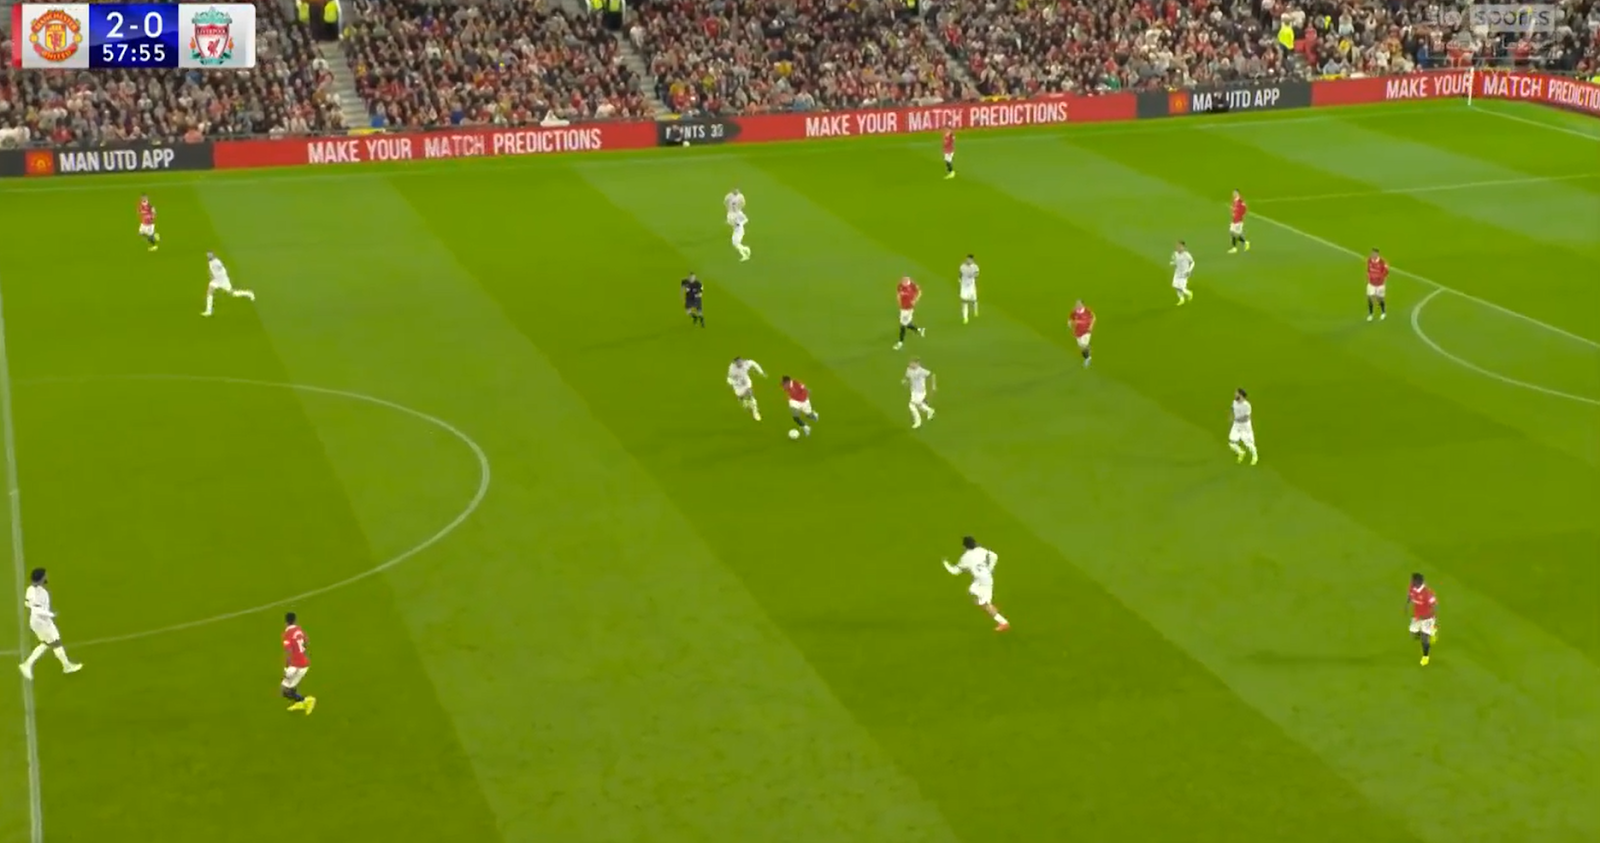 … but Martial retains the ball excellently under pressure. He then plays it to Rashford, who looked to find Fernandes on the far right but couldn’t quite pick him out (Sky Sports)